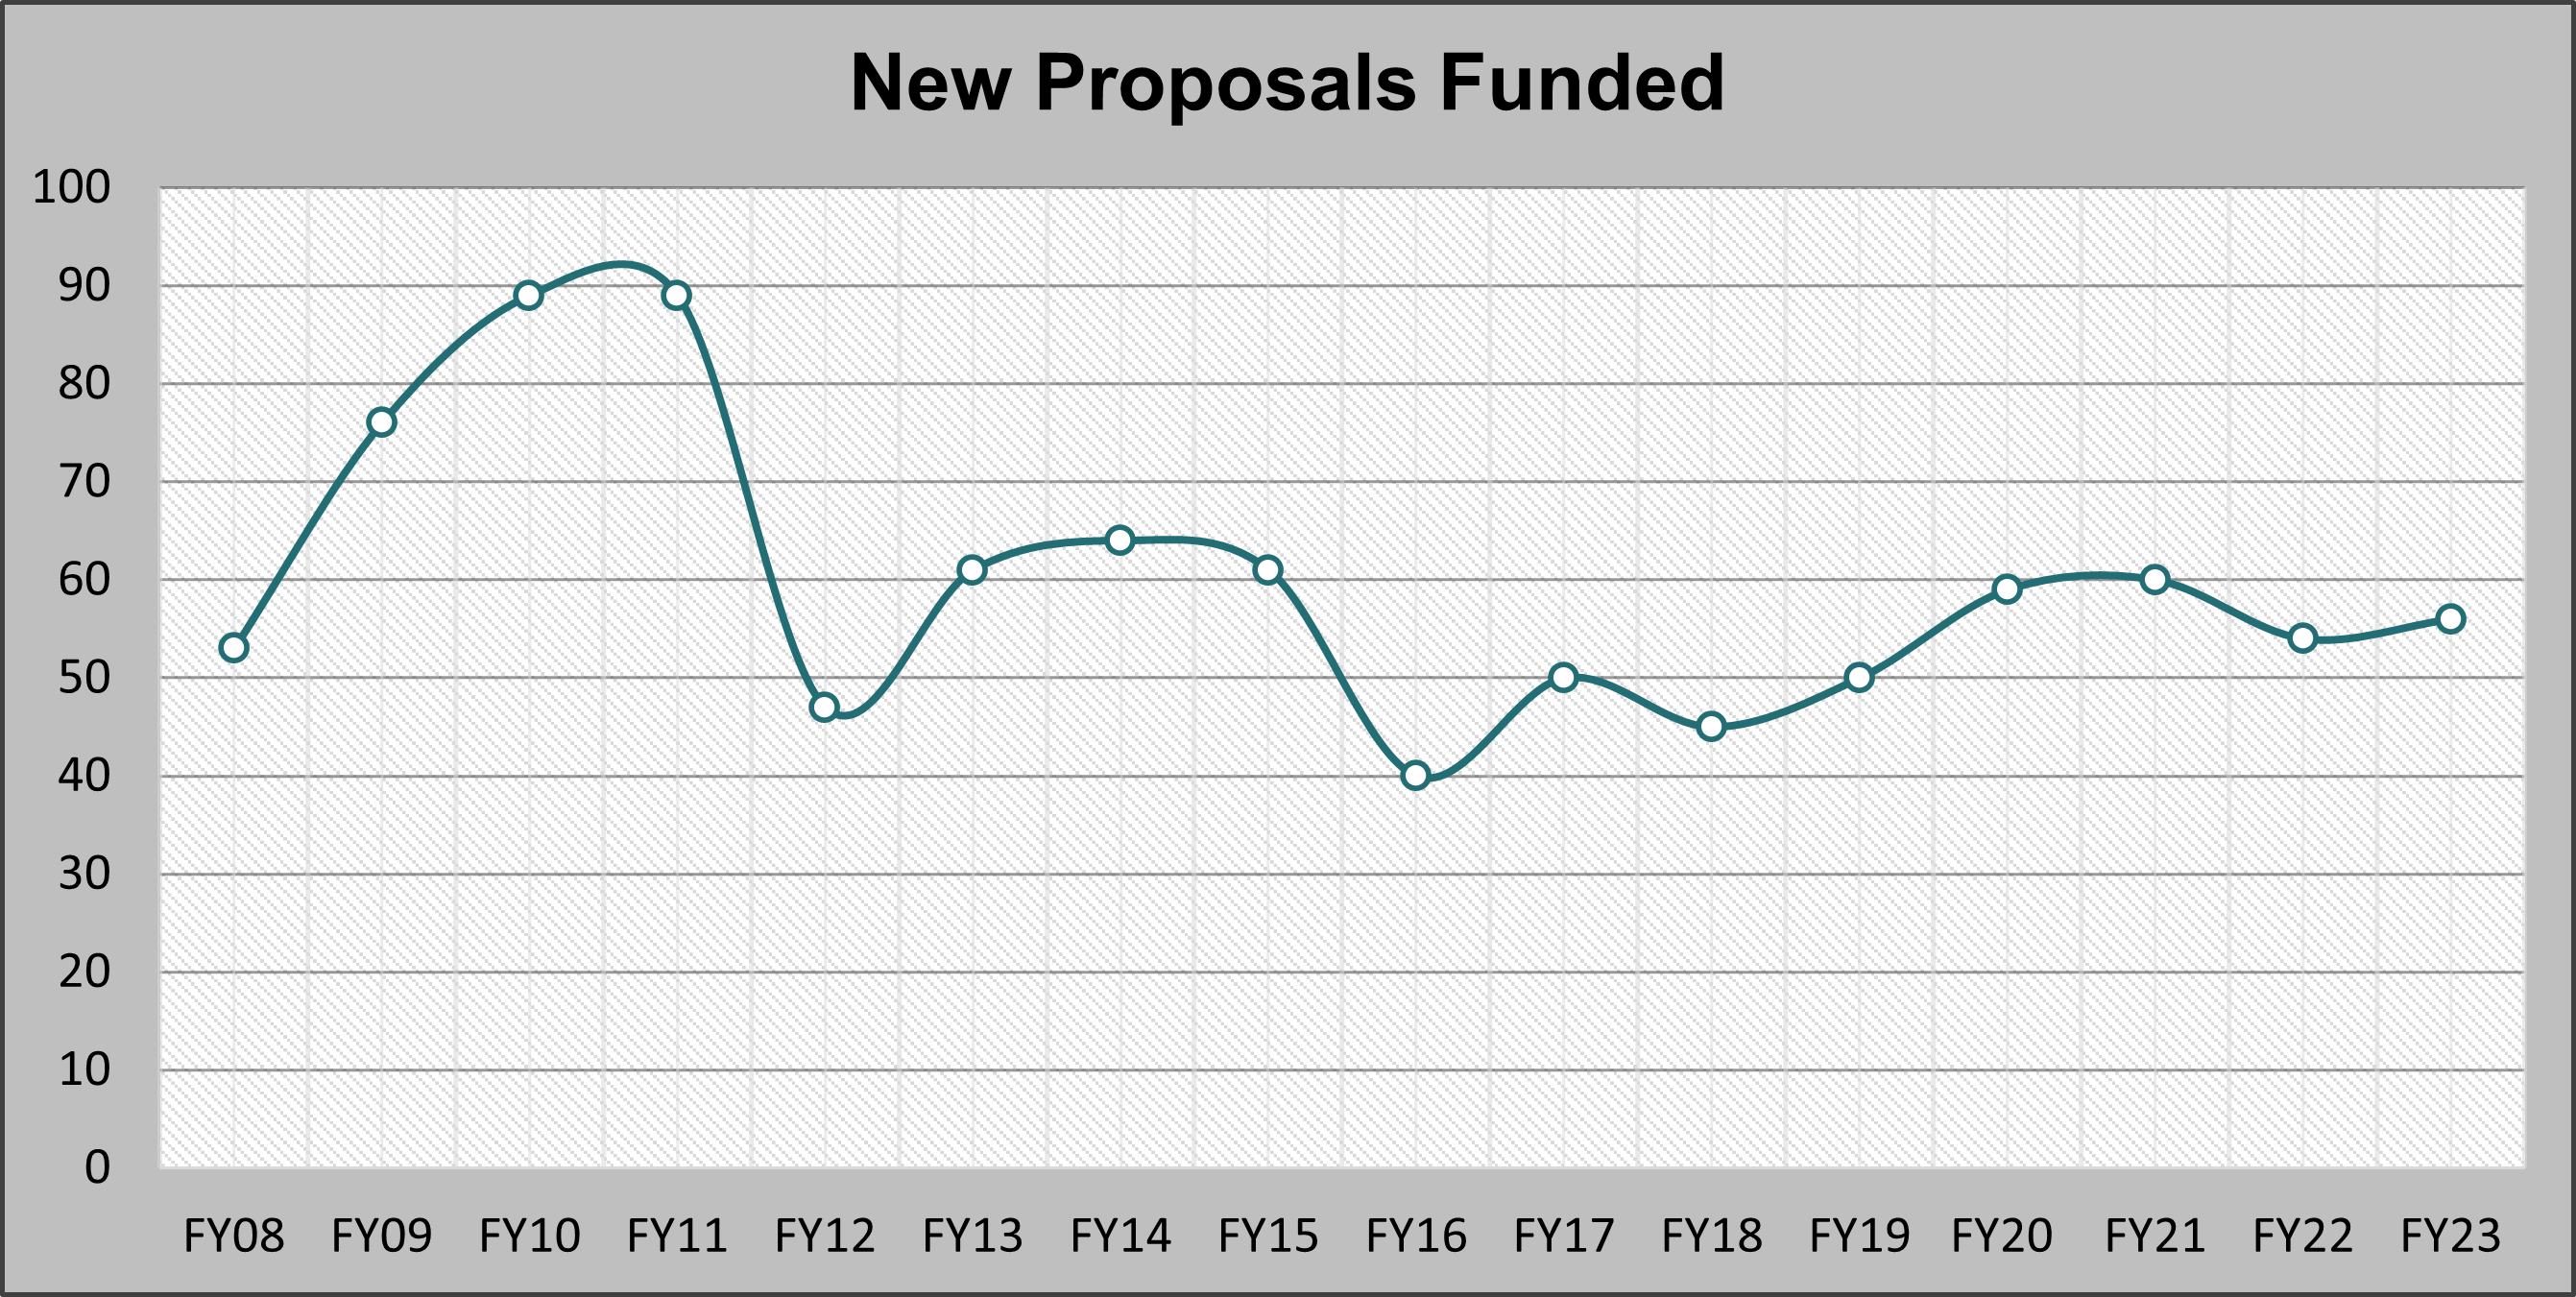 Chart of new proposals that have been funded from FY08 to FY23